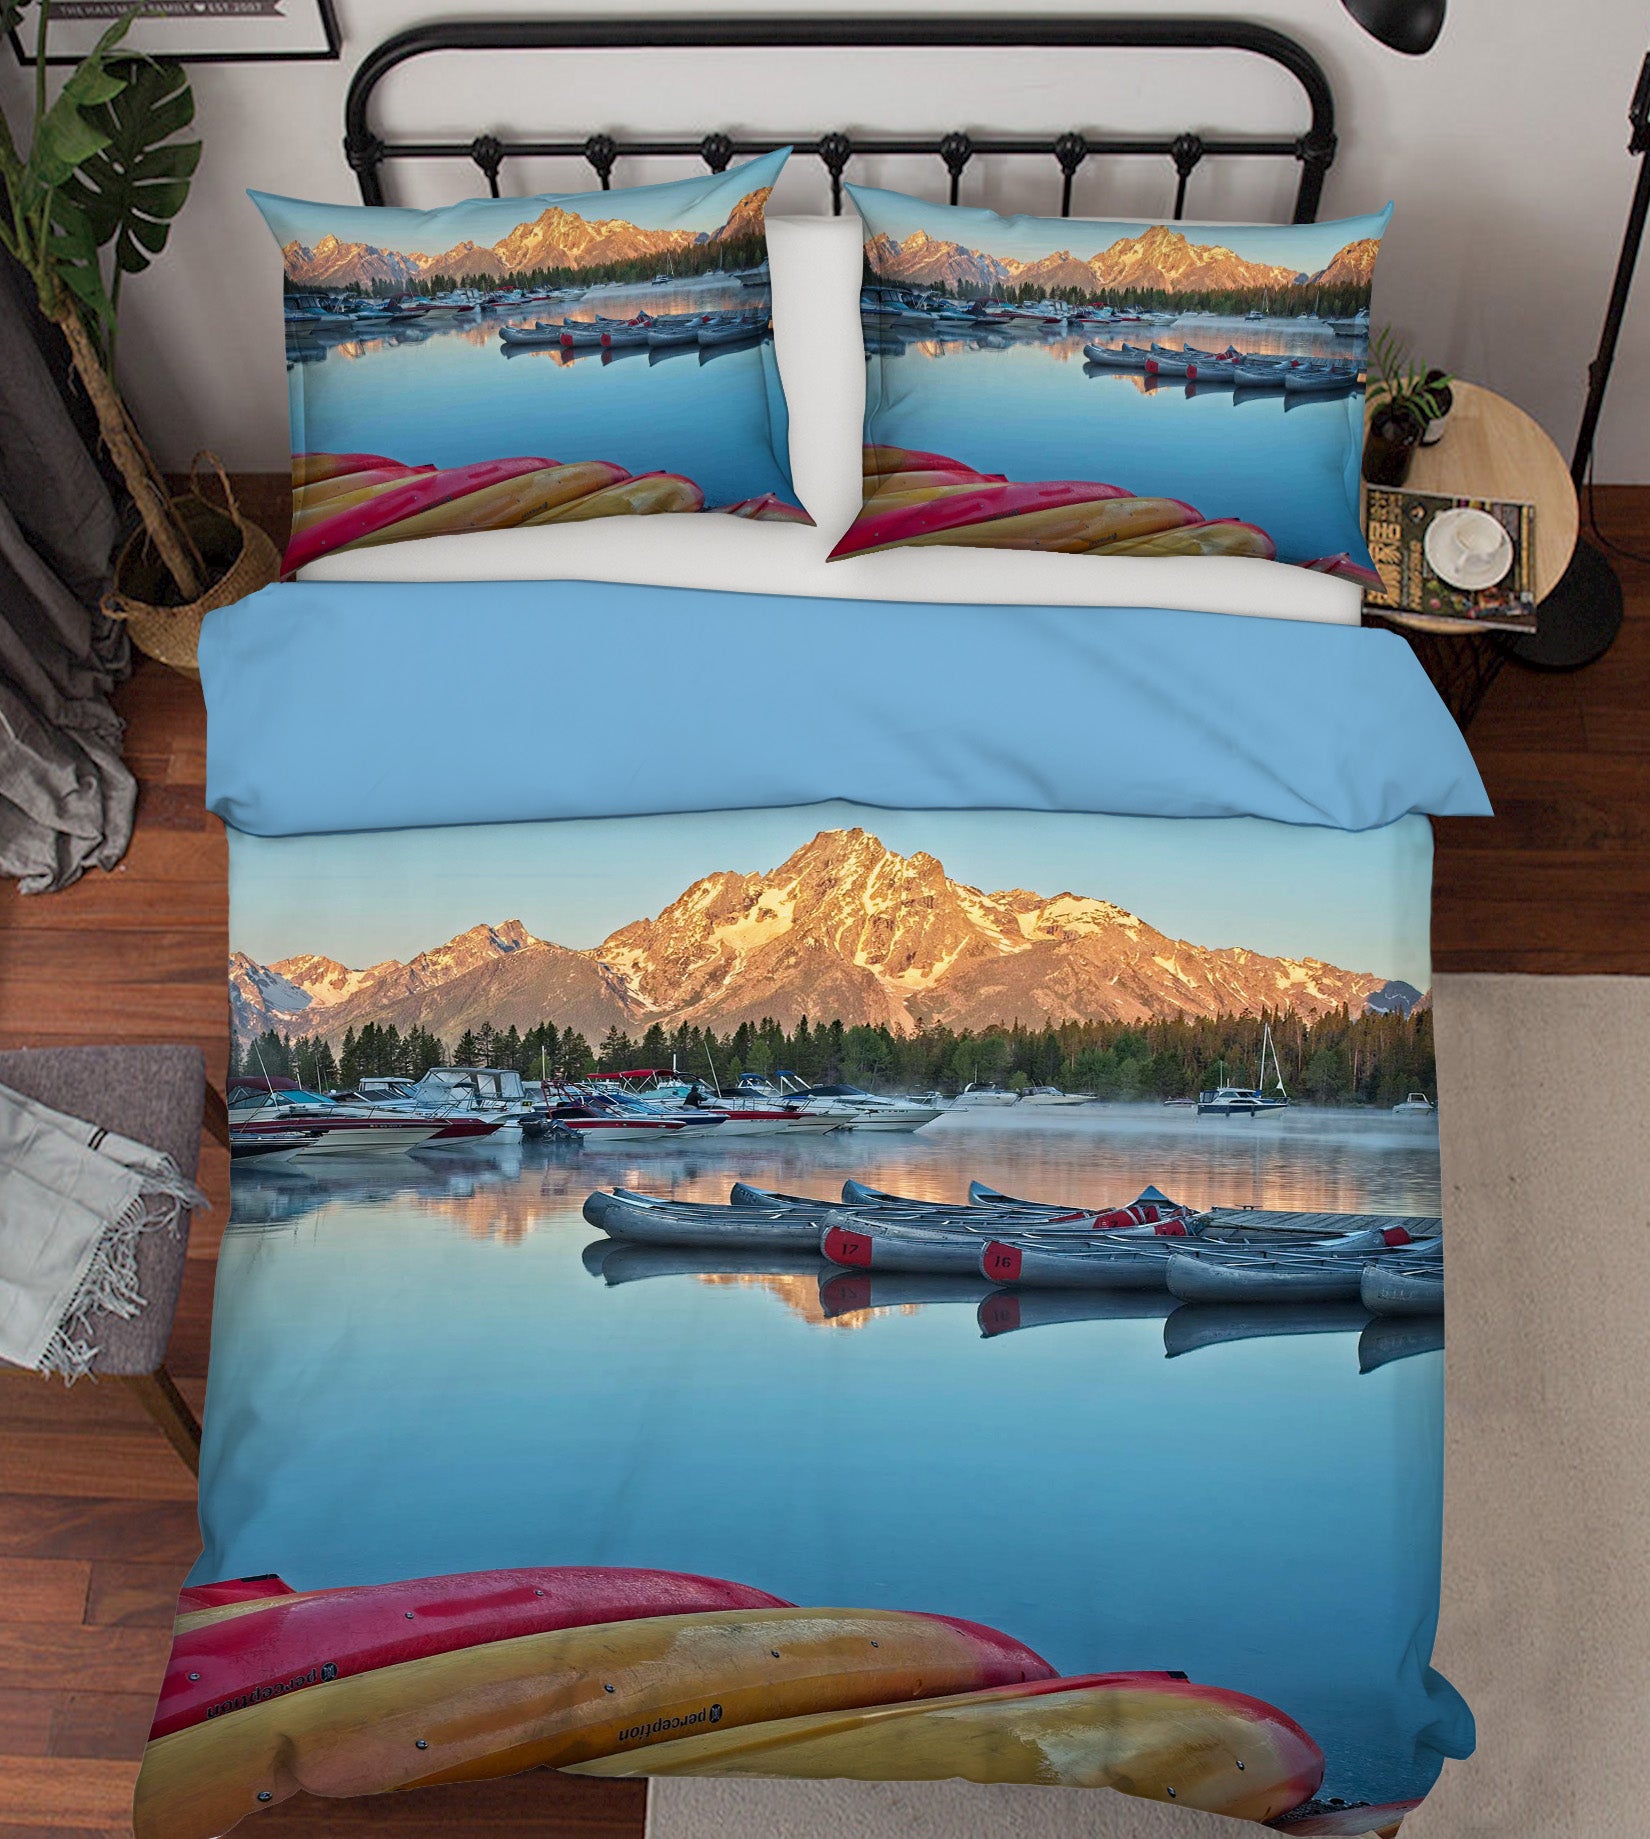 3D Waterside Mountain Peak 2132 Kathy Barefield Bedding Bed Pillowcases Quilt